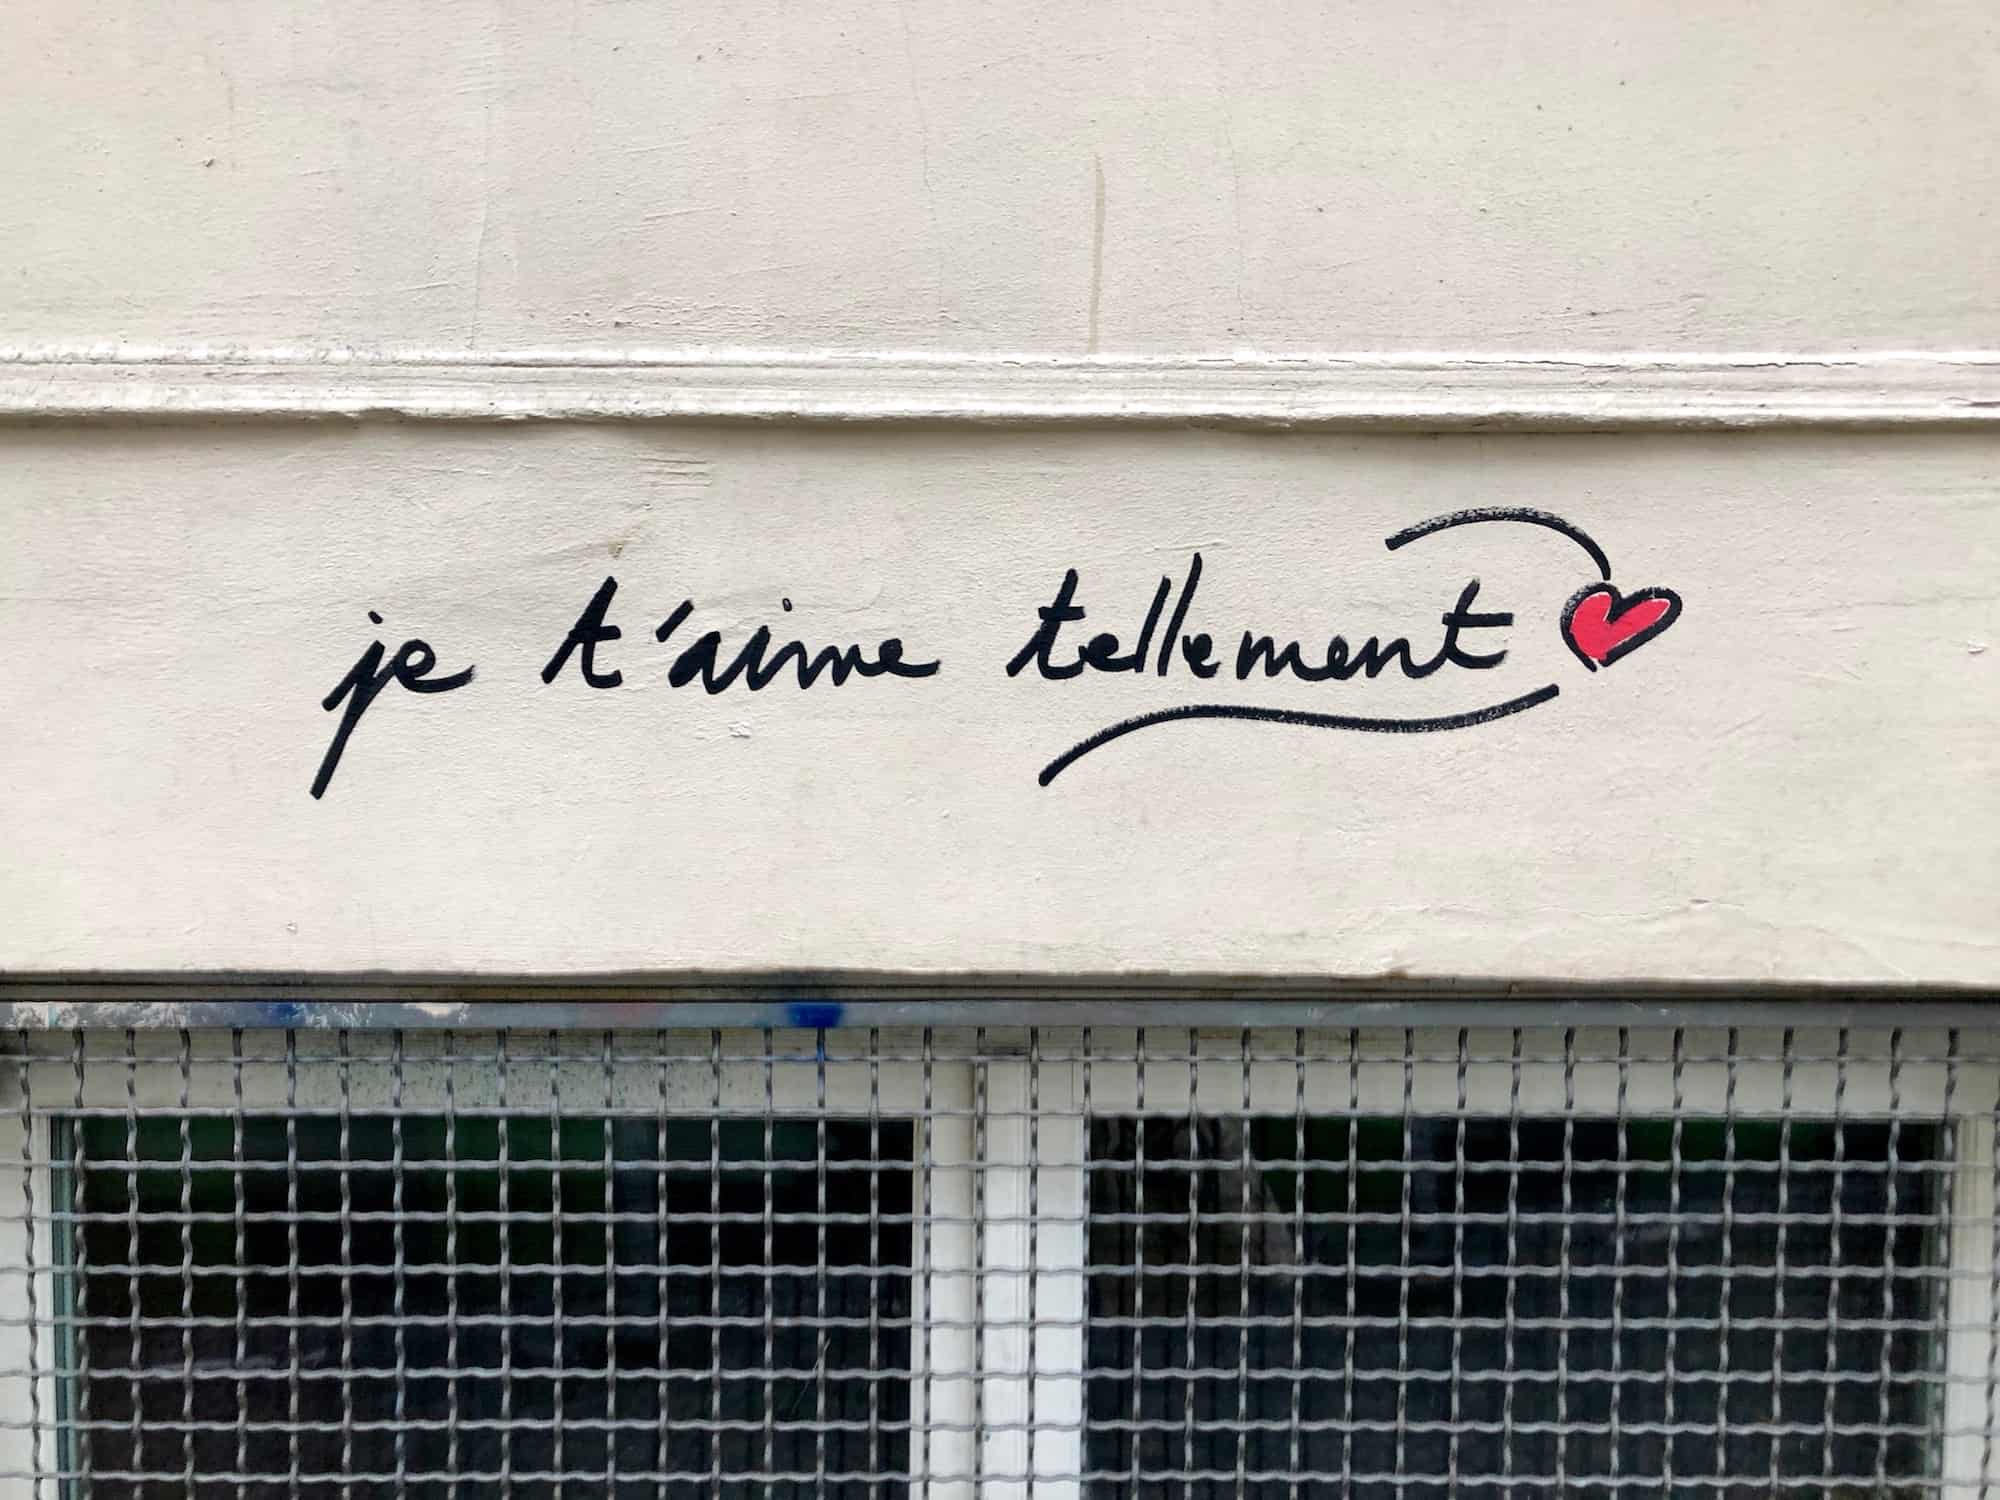 HiP Paris Blog tells you about one writer's experience learning French in Paris and exploring the street art like this piece: I love you so much.